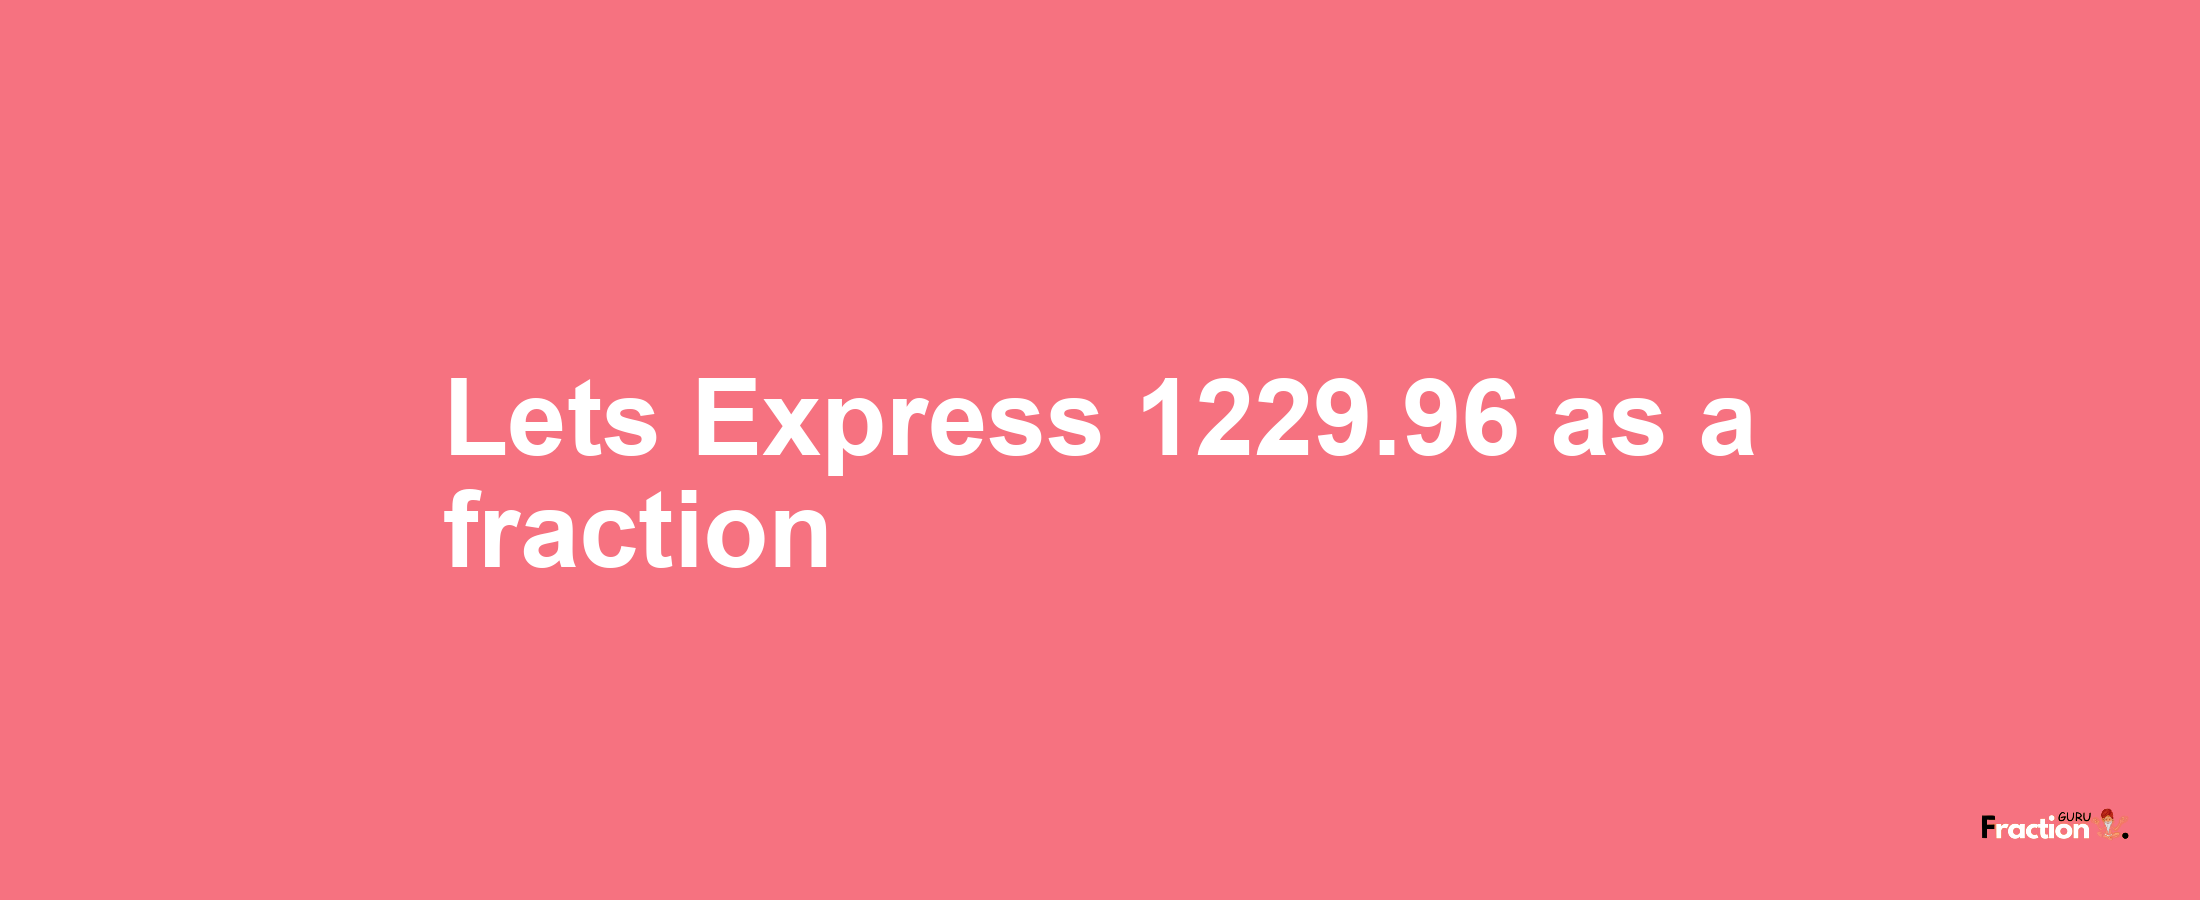 Lets Express 1229.96 as afraction